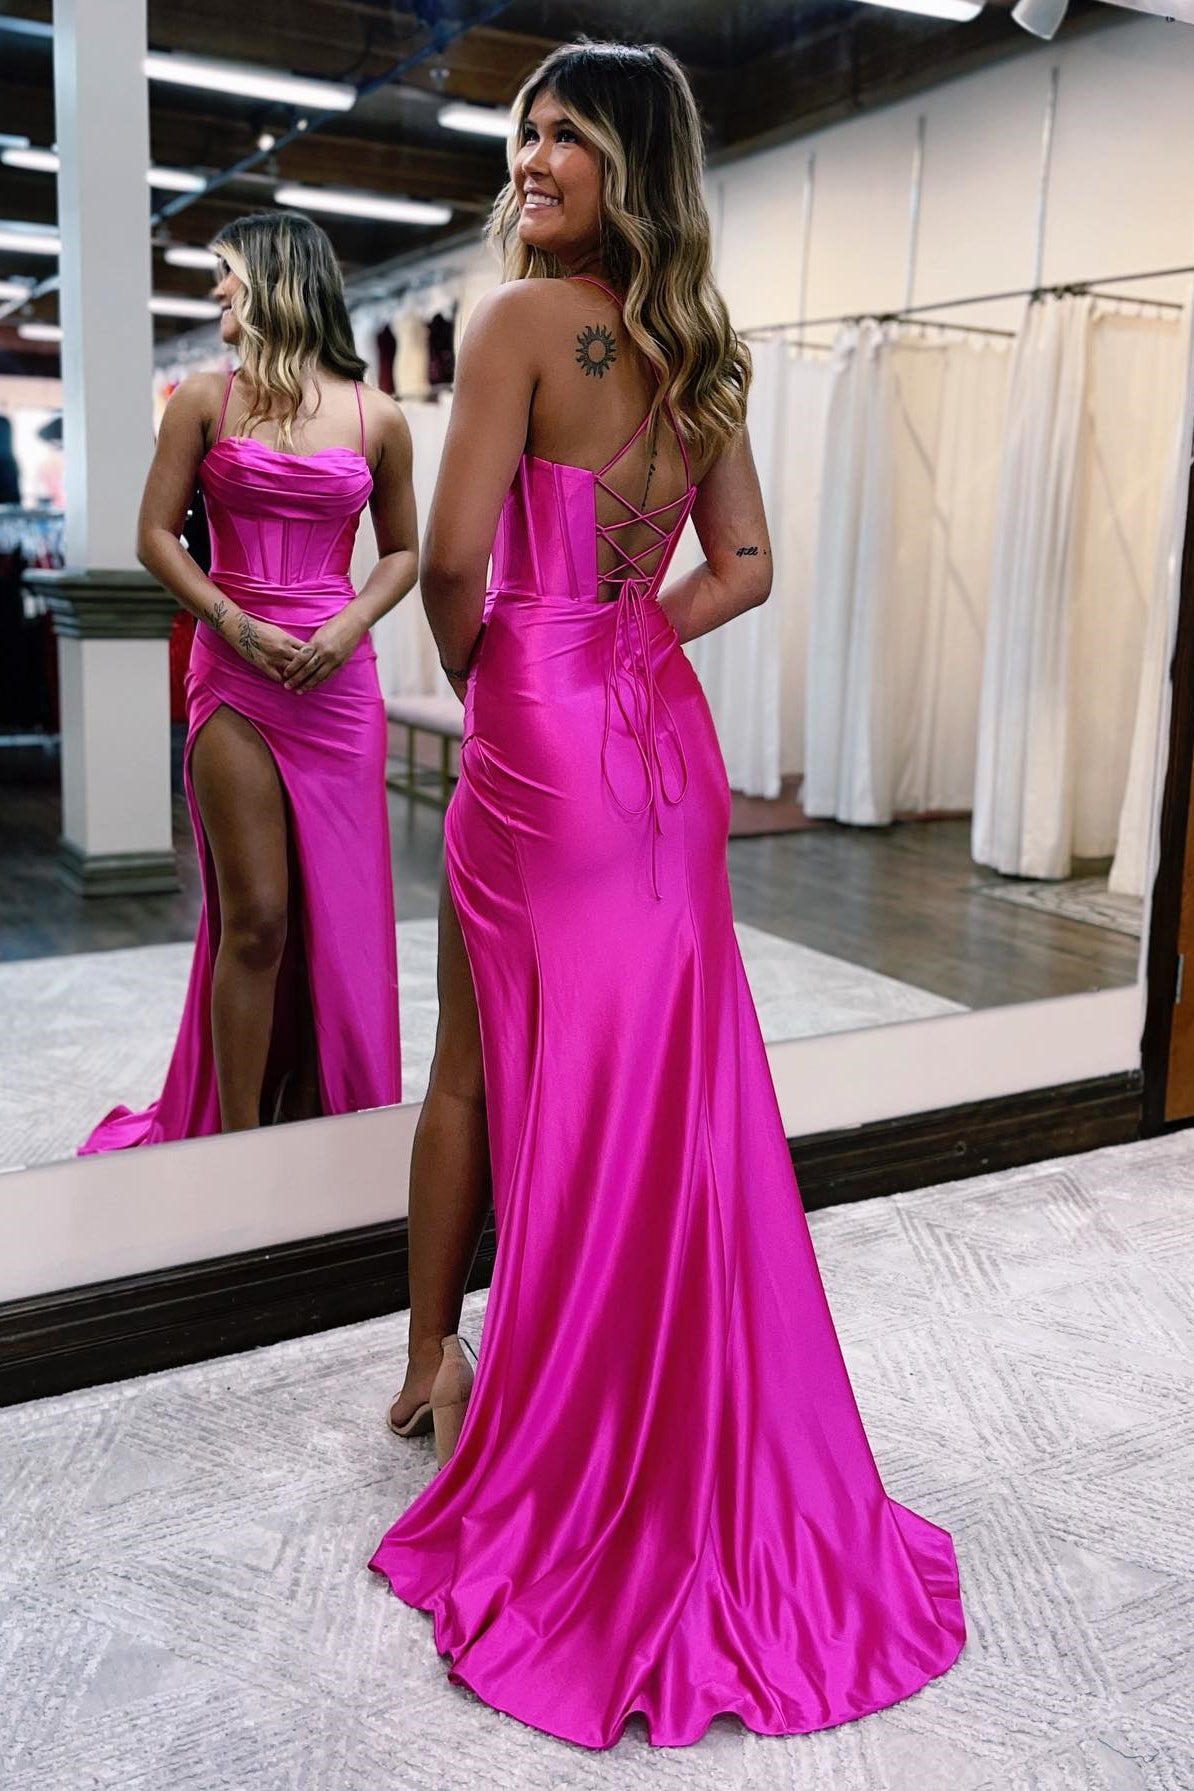 Spaghetti Strap Hot Pink Sequin Prom Dresses with Slit Lace-up Back FD –  Viniodress